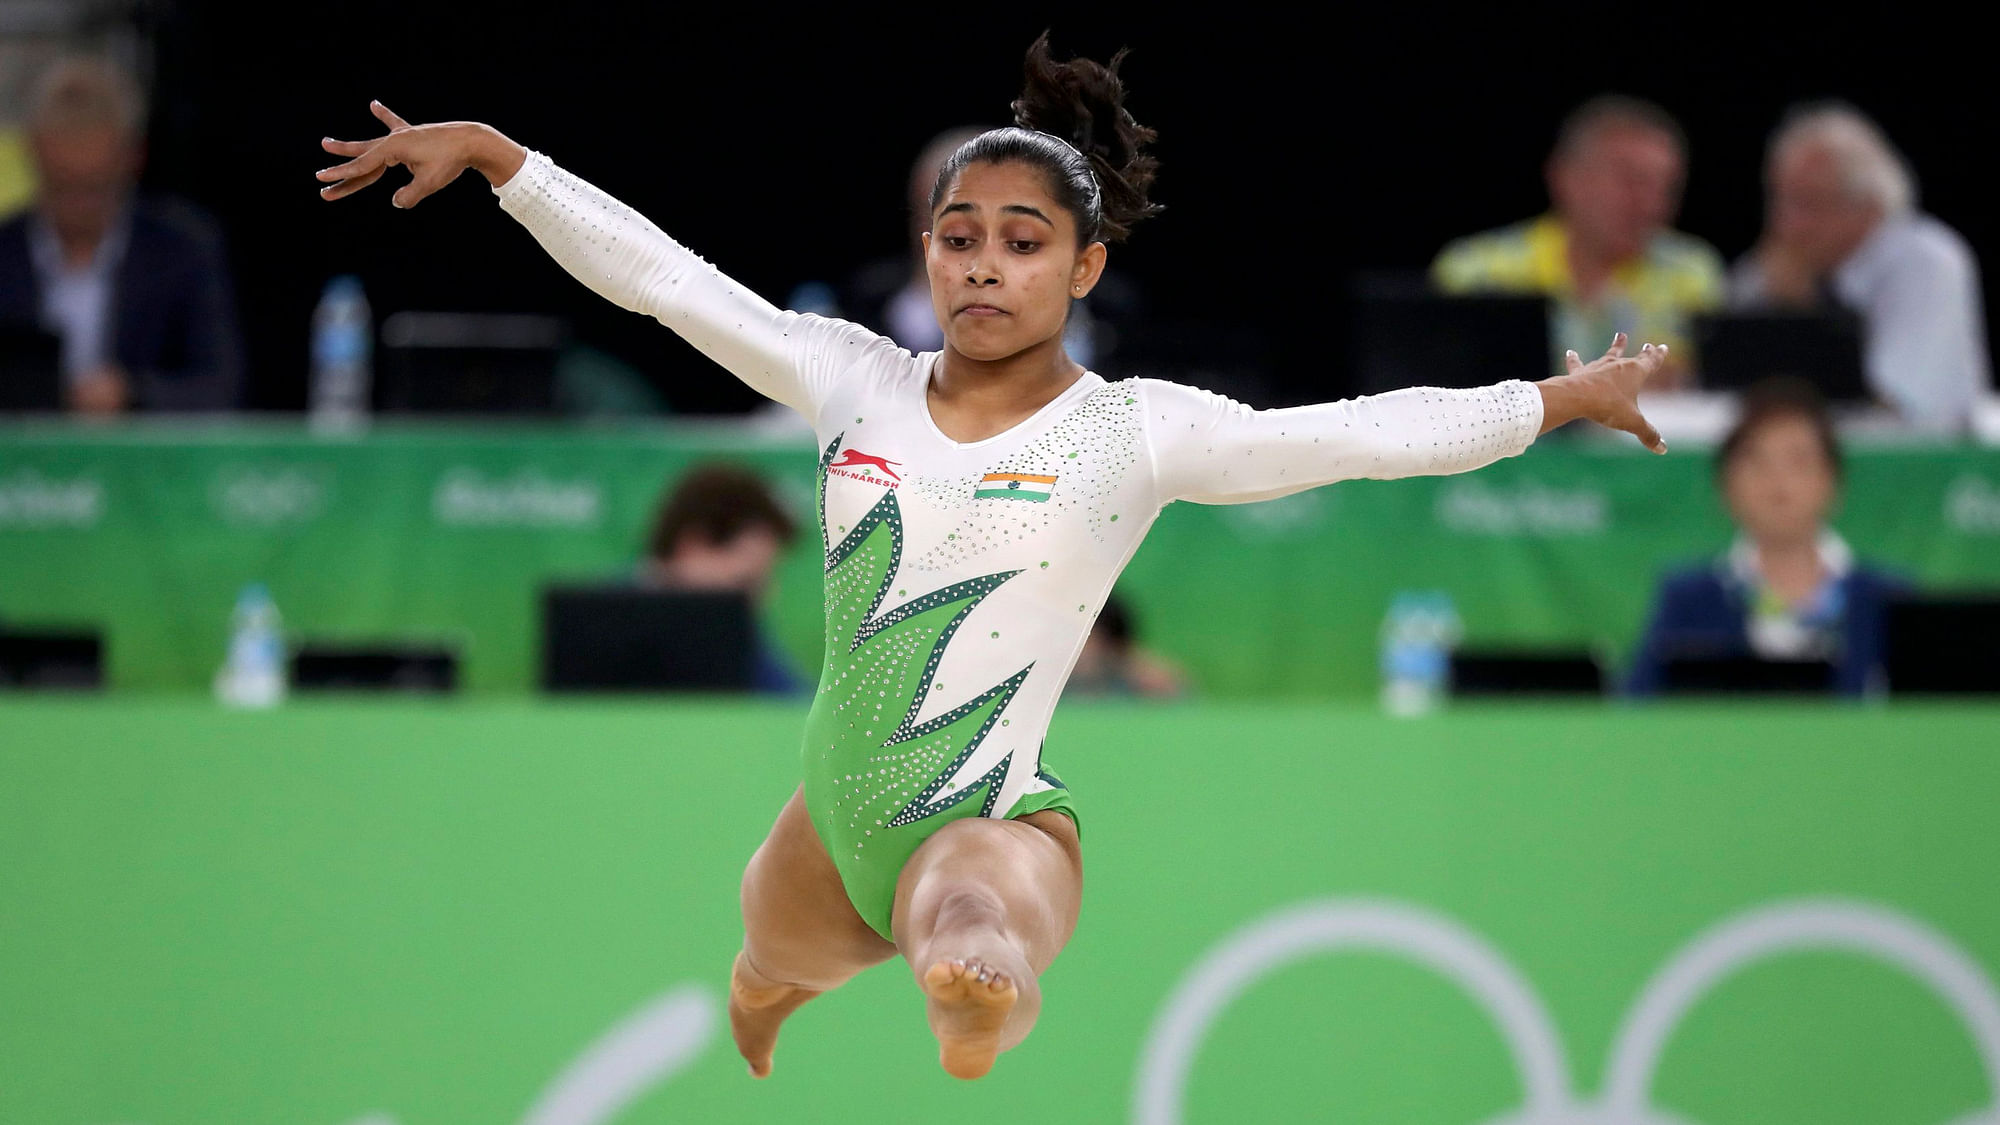 A postponed Olympics mean Dipa Karmakar gets a chance to get back from injury and book a ticket to Tokyo.